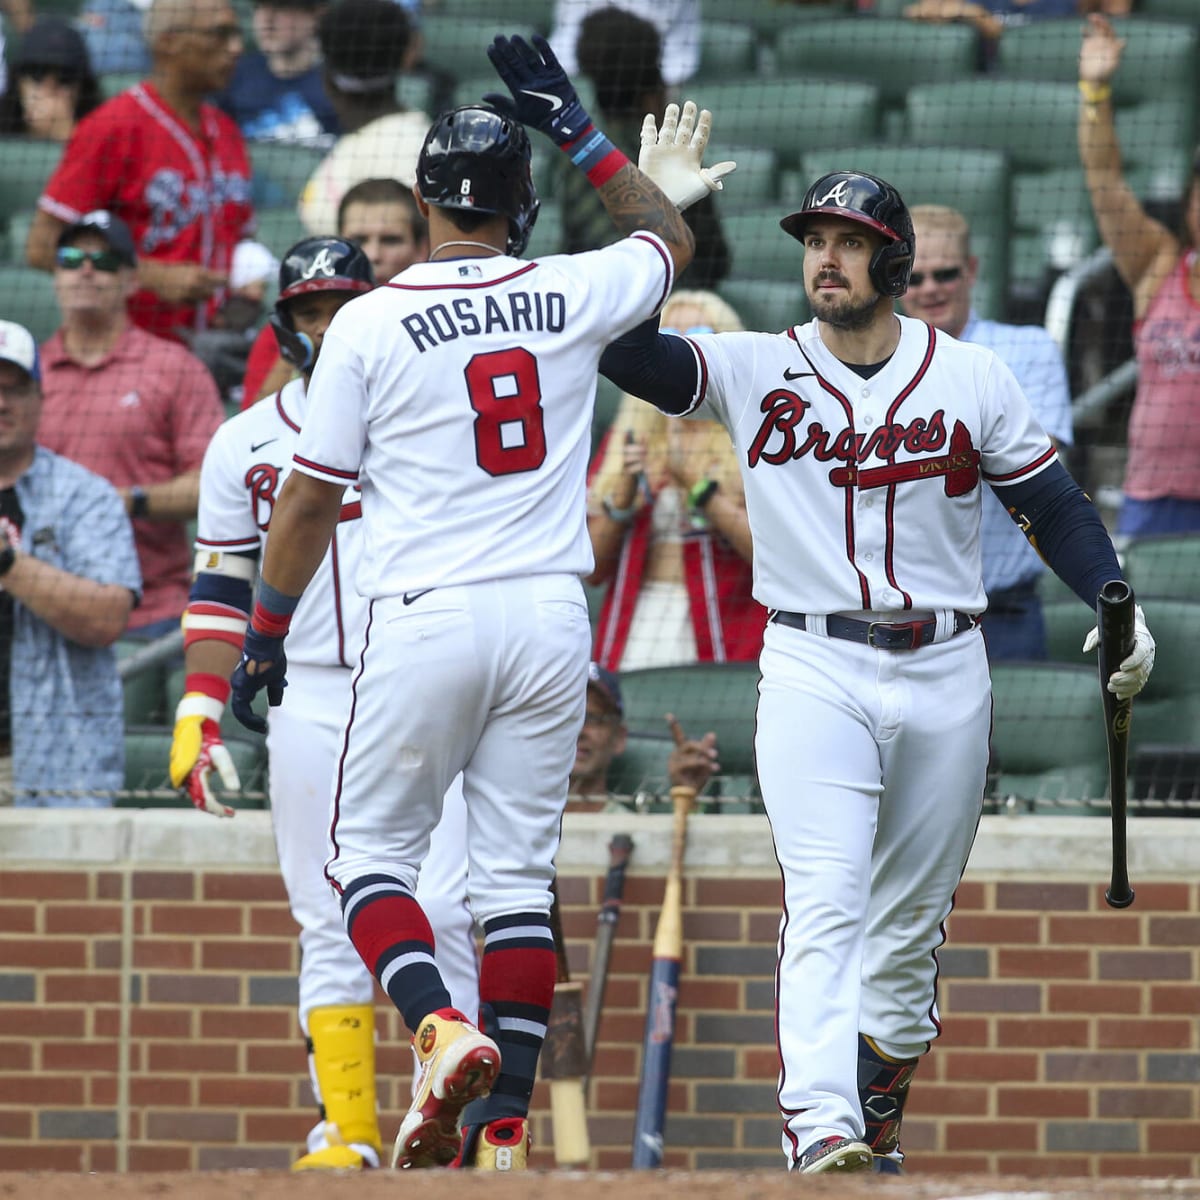 Get your news about the Braves, Dawgs, Jackets and Falcons in